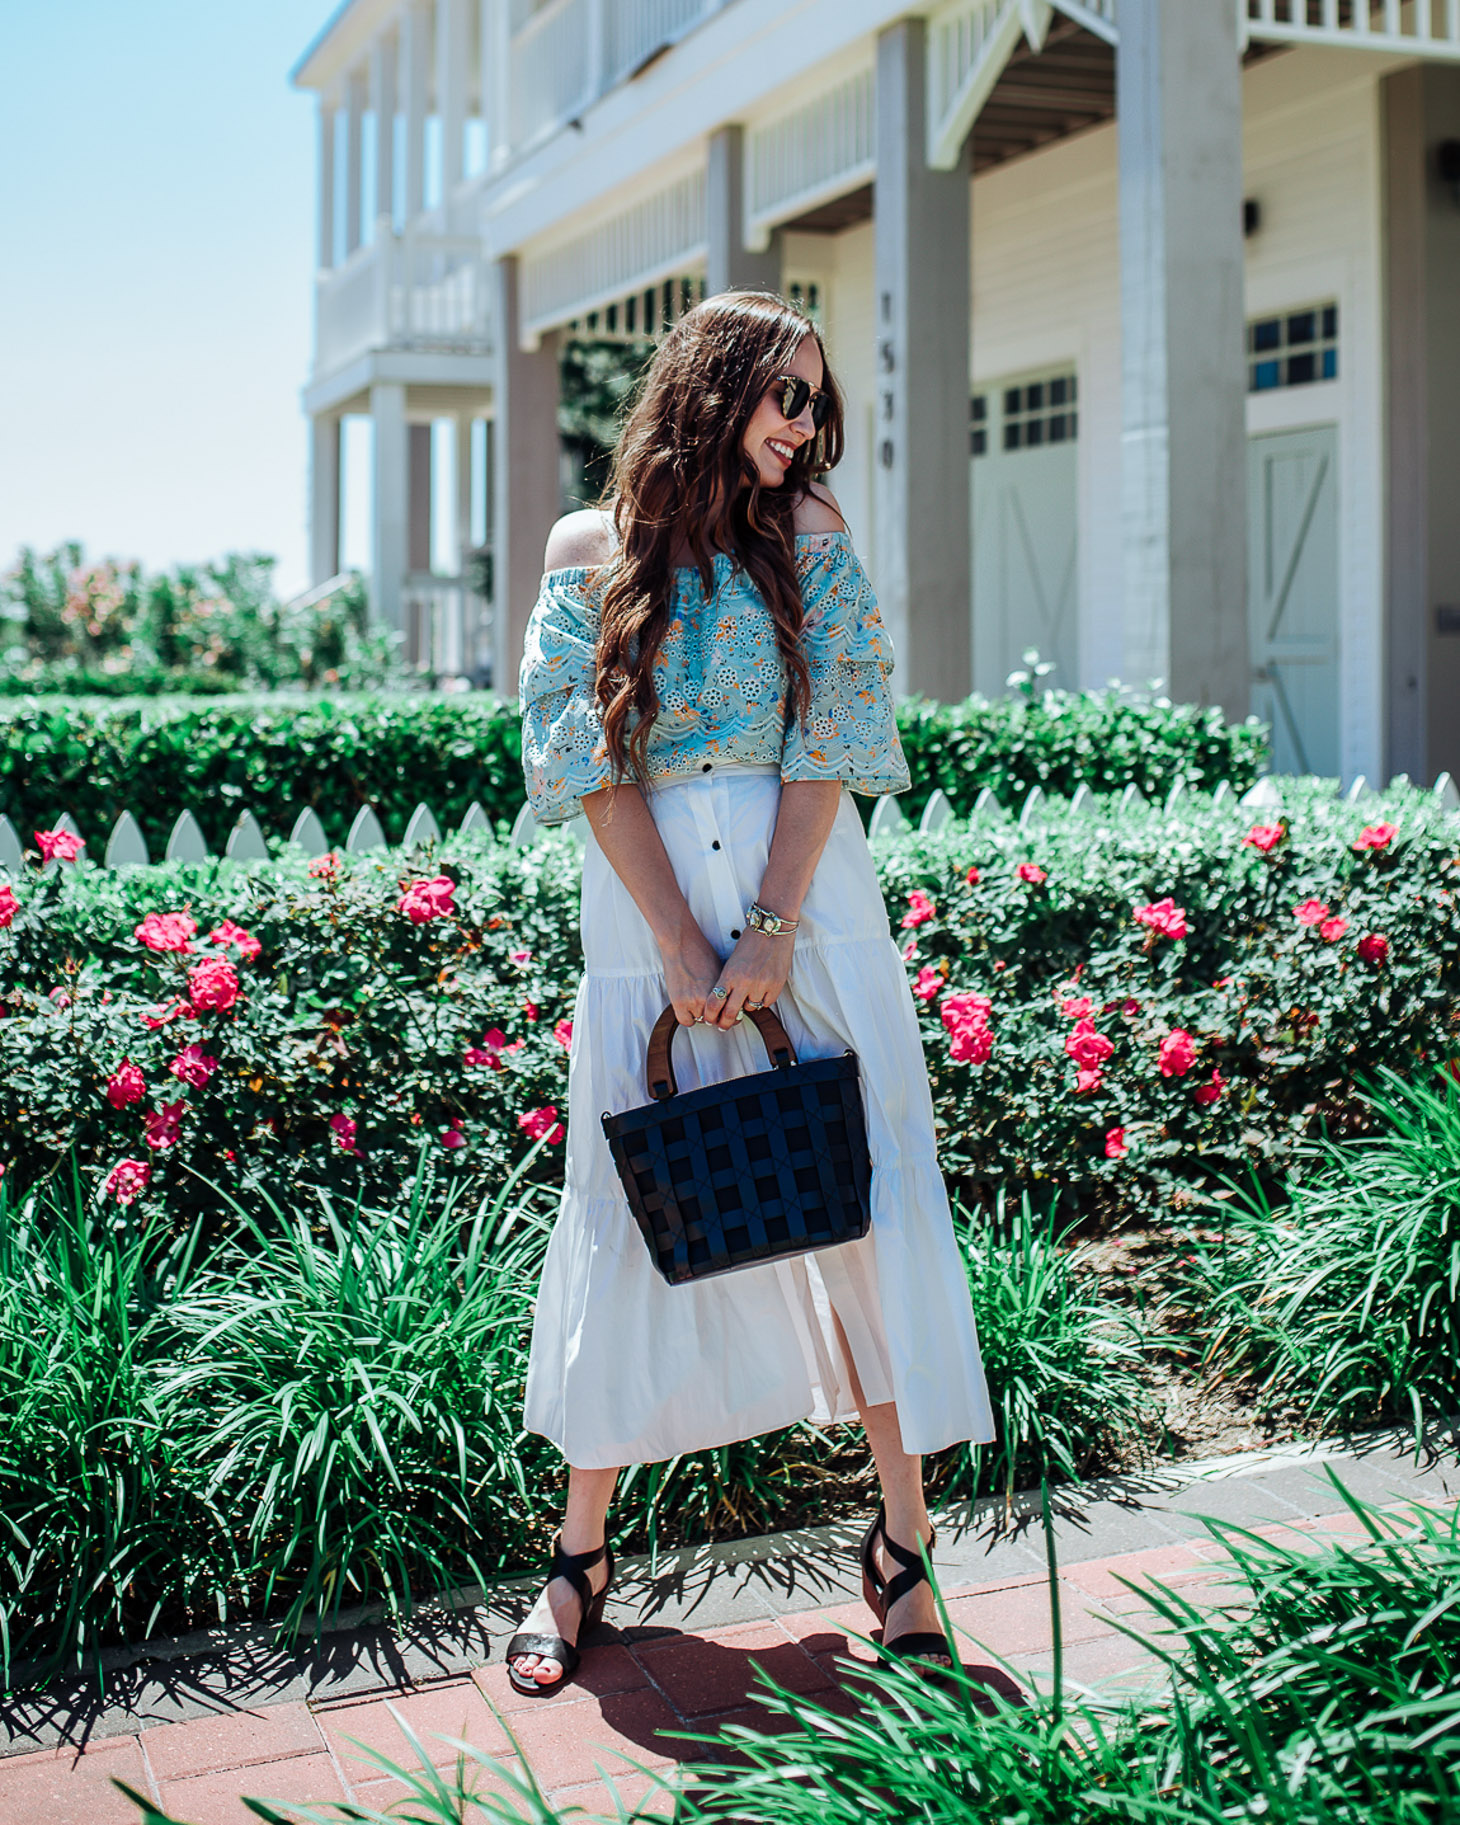 Stylish Platform Wedge Sandals for Summer featured by top US fashion blog, Lone Star Looking Glass: image of a woman wearing Solid & Striped long skirt, Anthropologie off the shoulder floral blouse, and Sofft platform wedge sandals